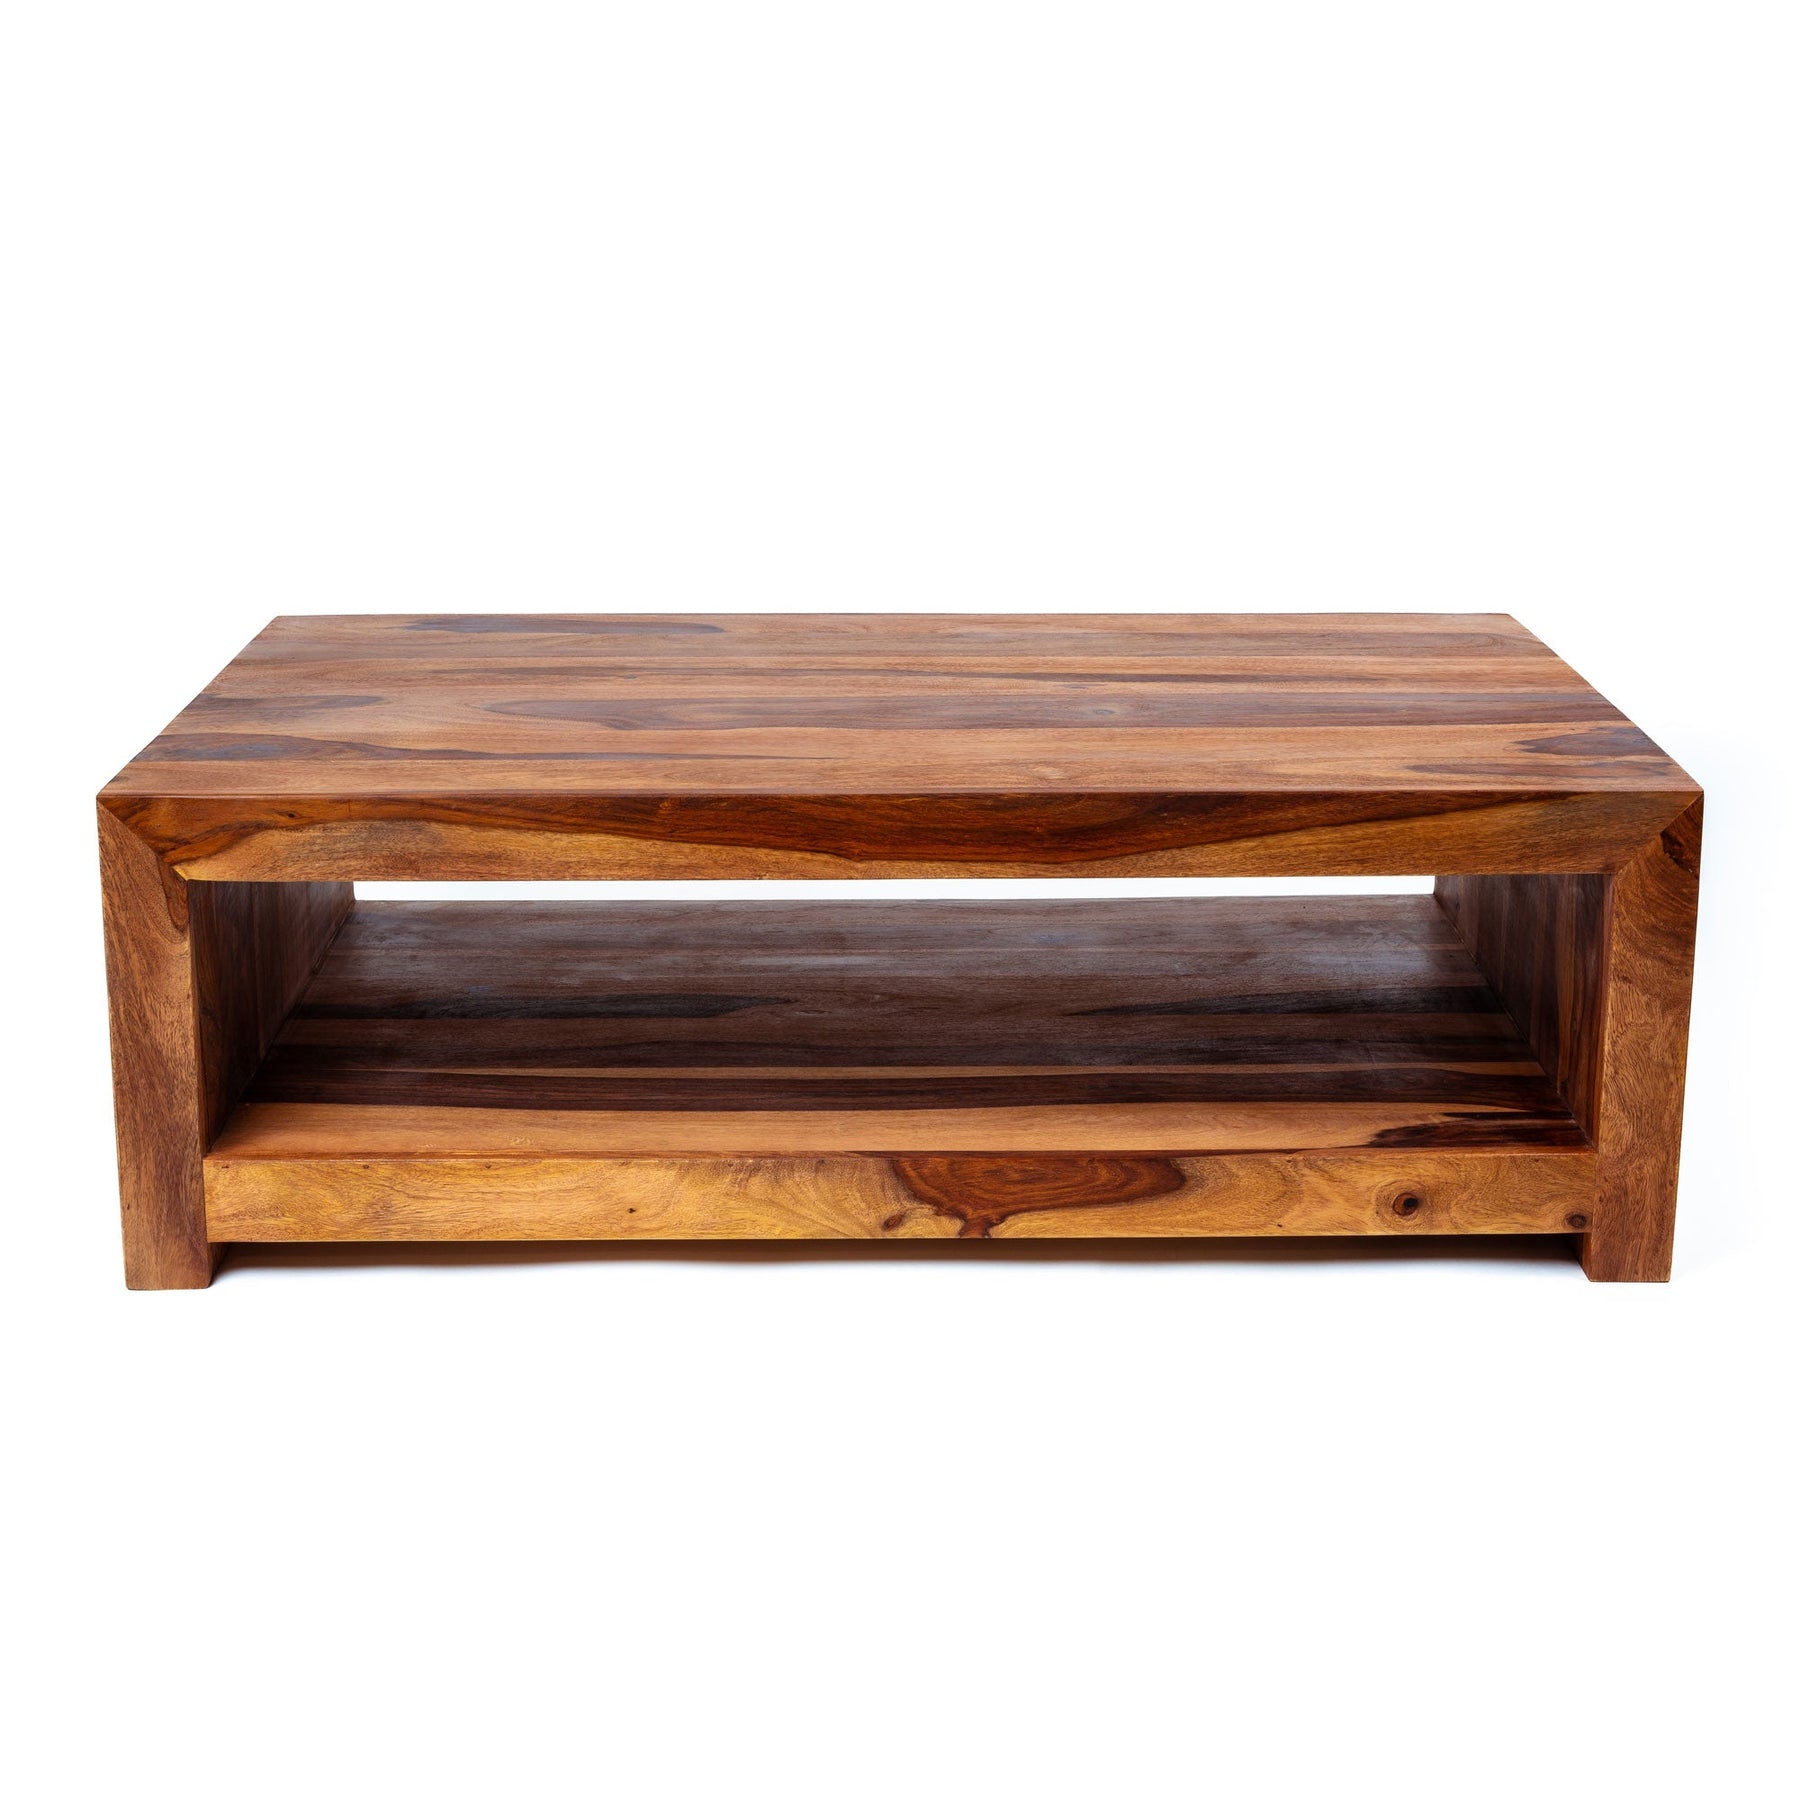 Zen Wooden Coffee Table - 2 Tier Unique Wooden Coffee Table with Storage Shelf | 2 Sizes Available